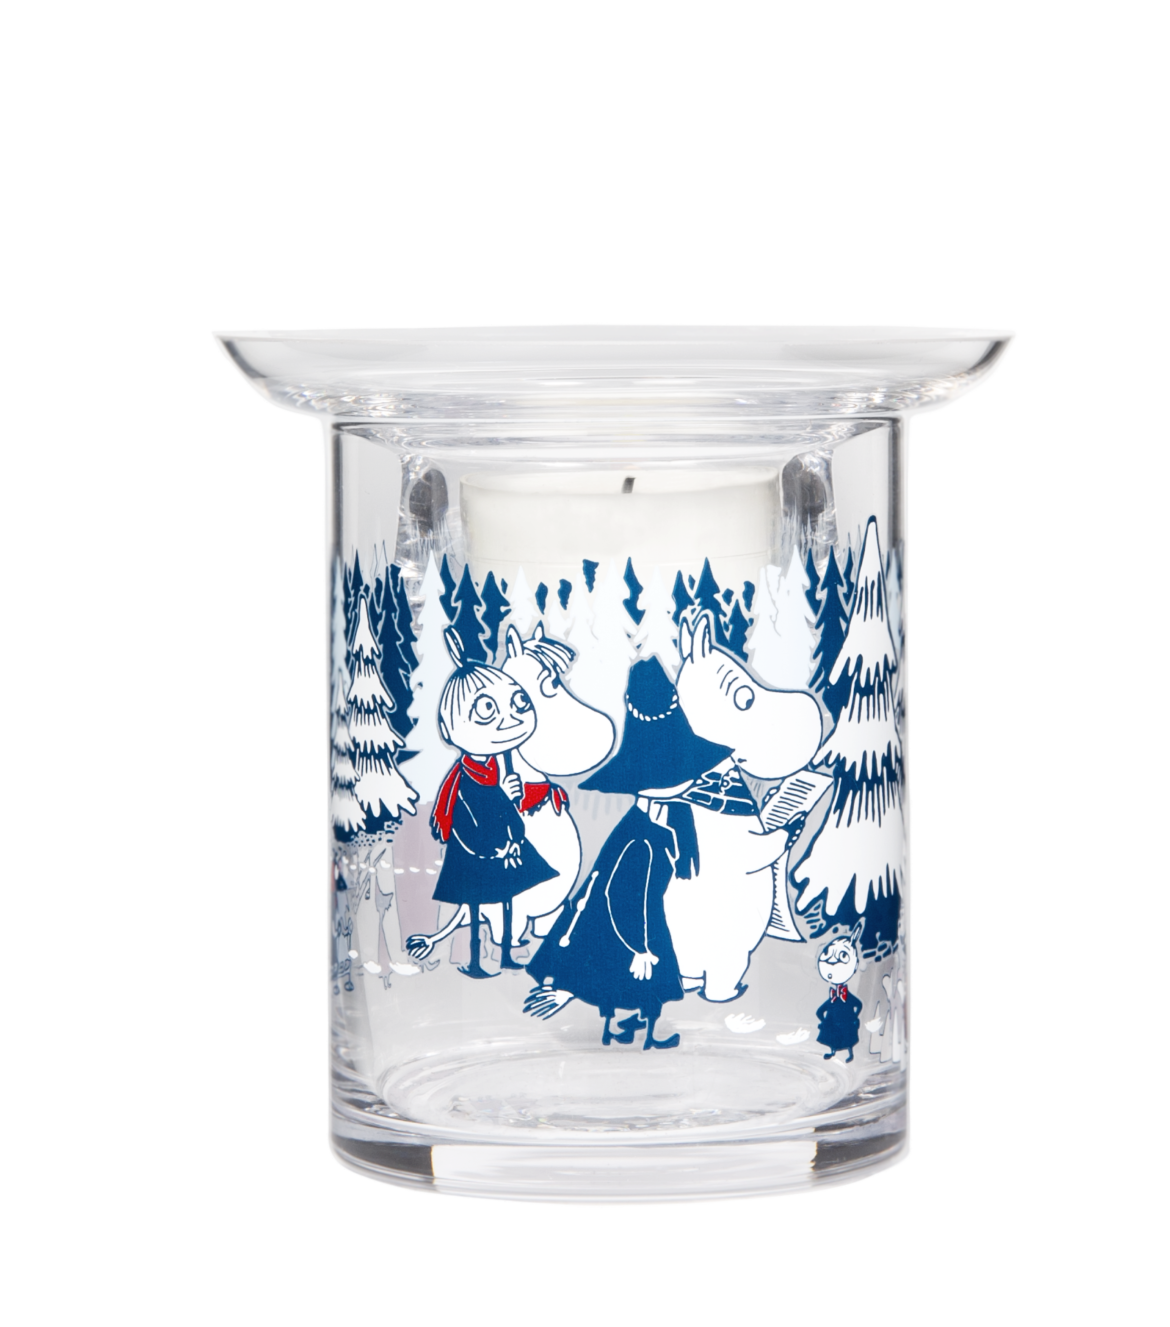 Interior/Home » Moomin products